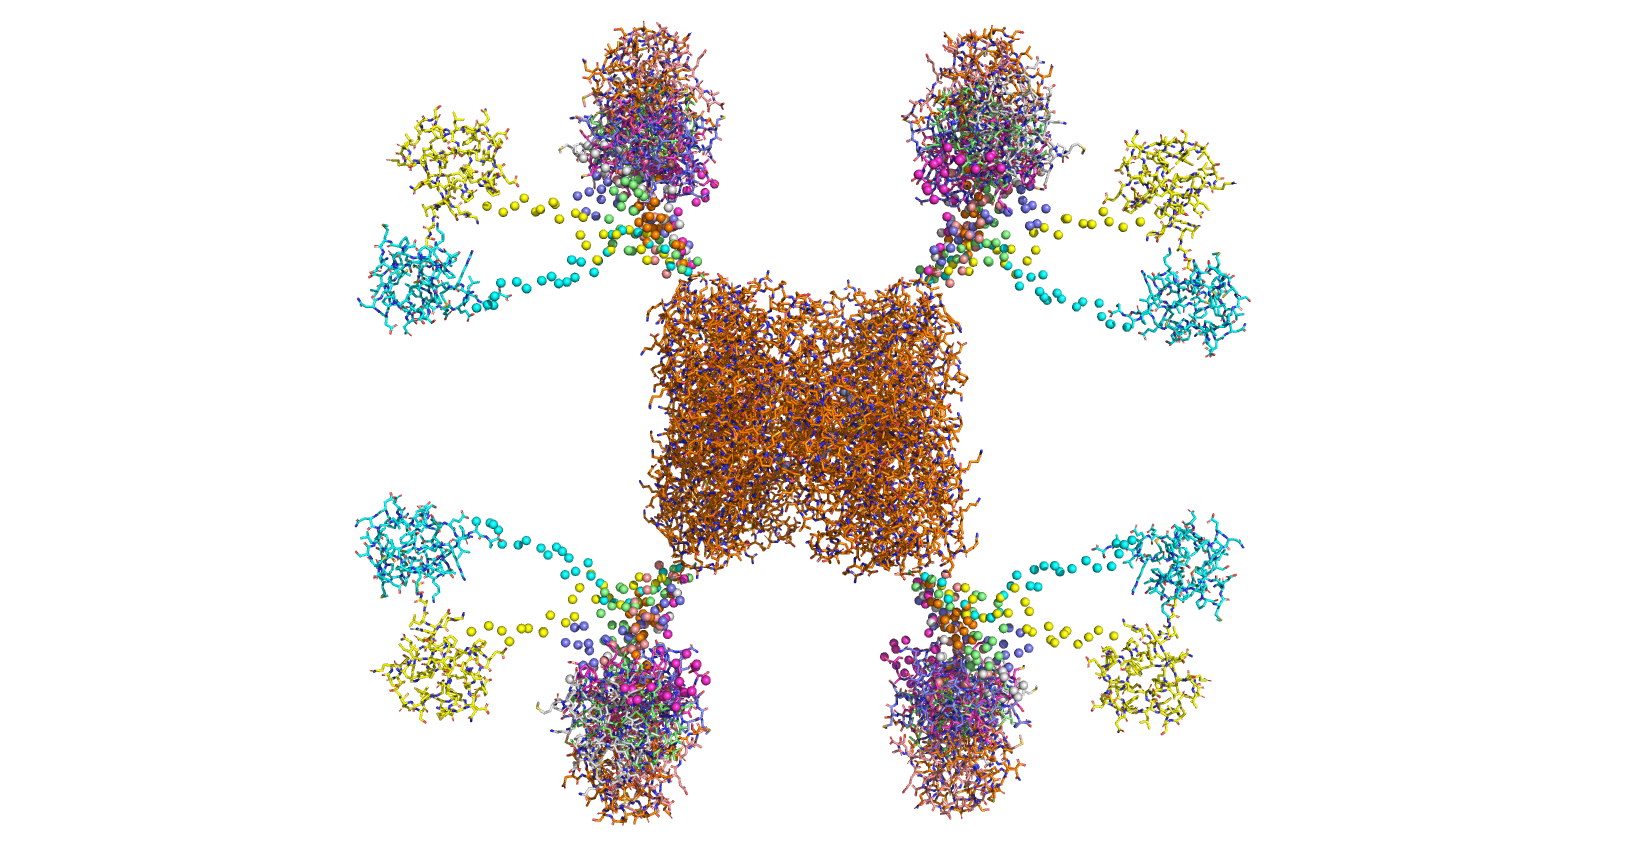 Anaerobic nitric oxide reductase flavorubredoxin OTHER [STATIC IMAGE] model